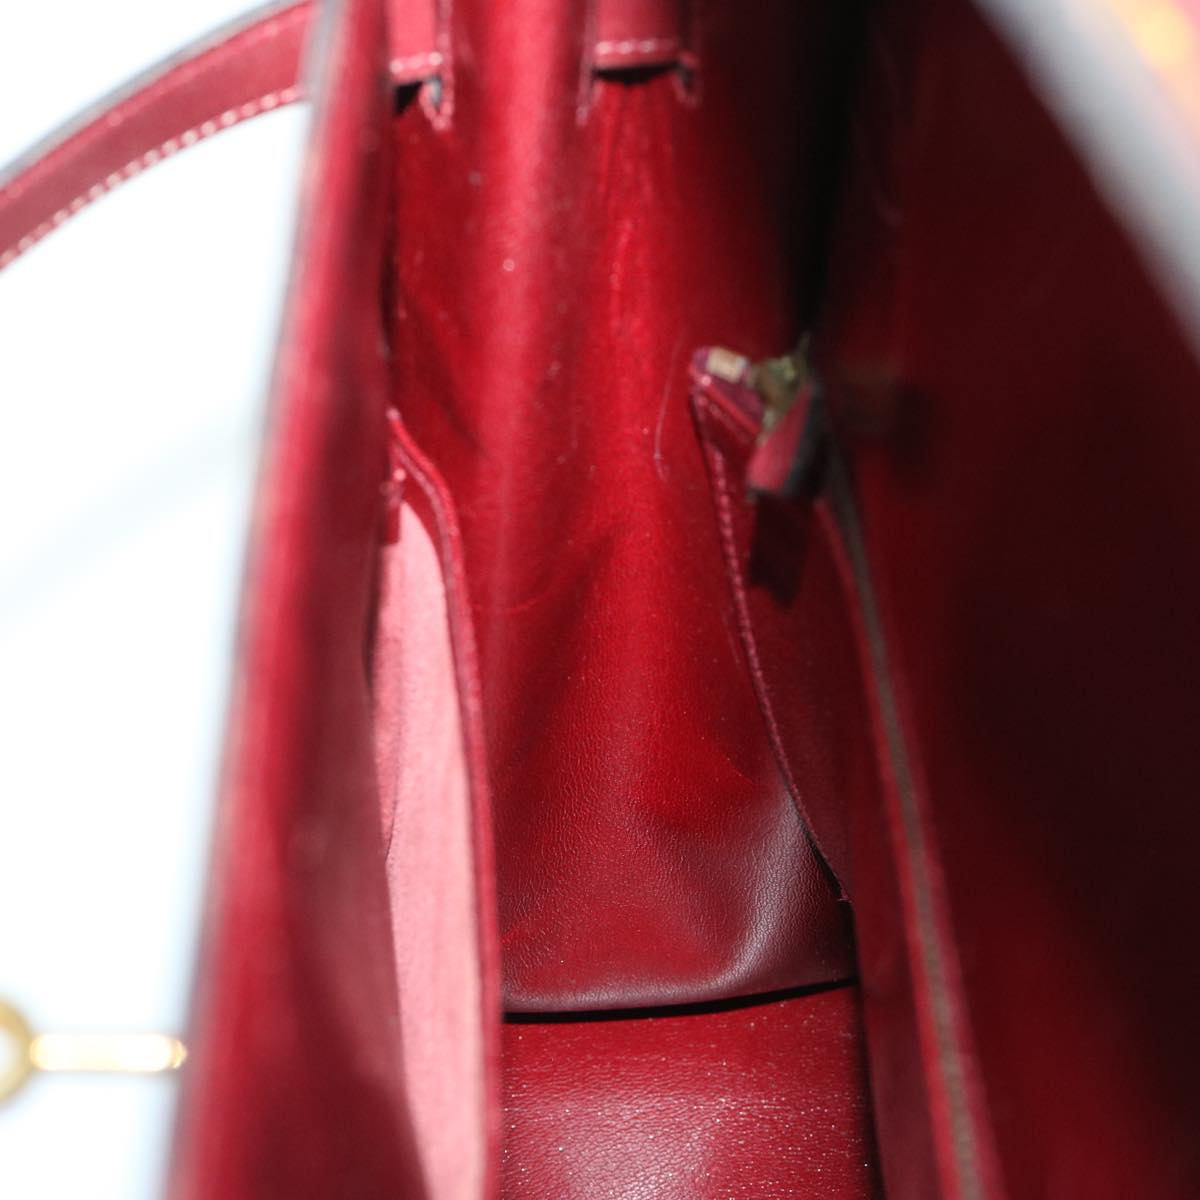 HERMES Kelly 35 Hand Bag Leather Bordeaux Auth 68891